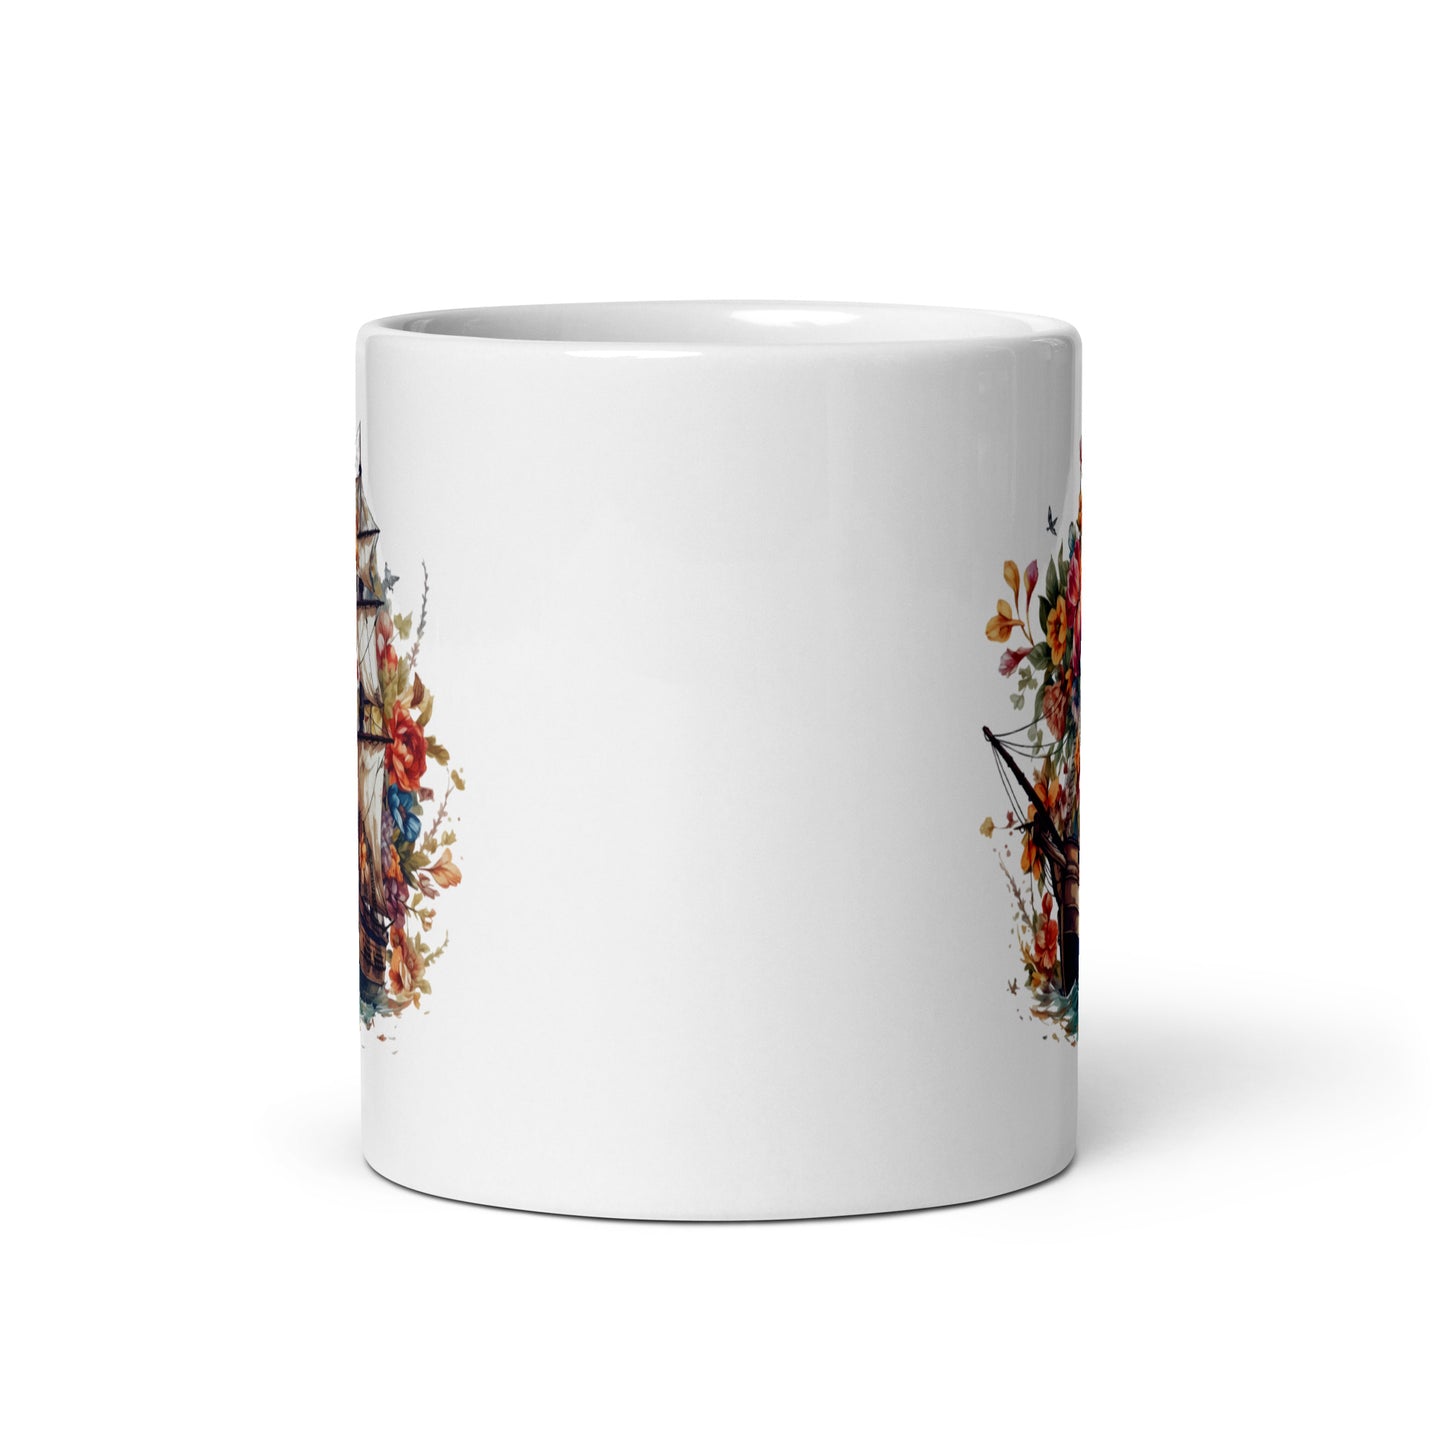 Sailboat illustration in sea, Ship with sails art composition, Frigate and flowers - White glossy mug